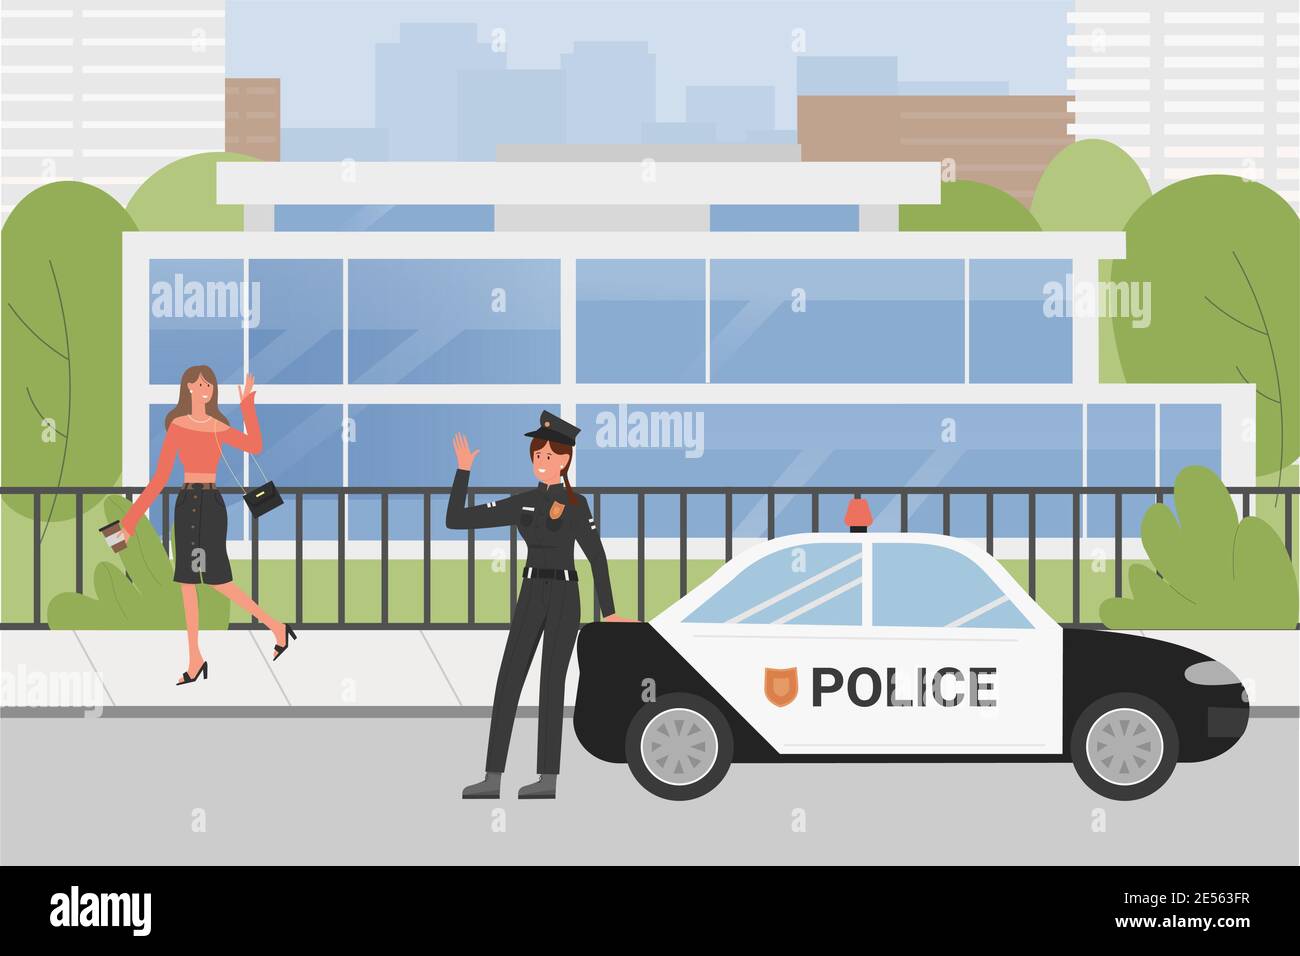 Police officer cop on city street urban scene vector illustration. Cartoon woman police worker character in uniform waving to walking pedestrian girl, standing in front of patrol police car background Stock Vector